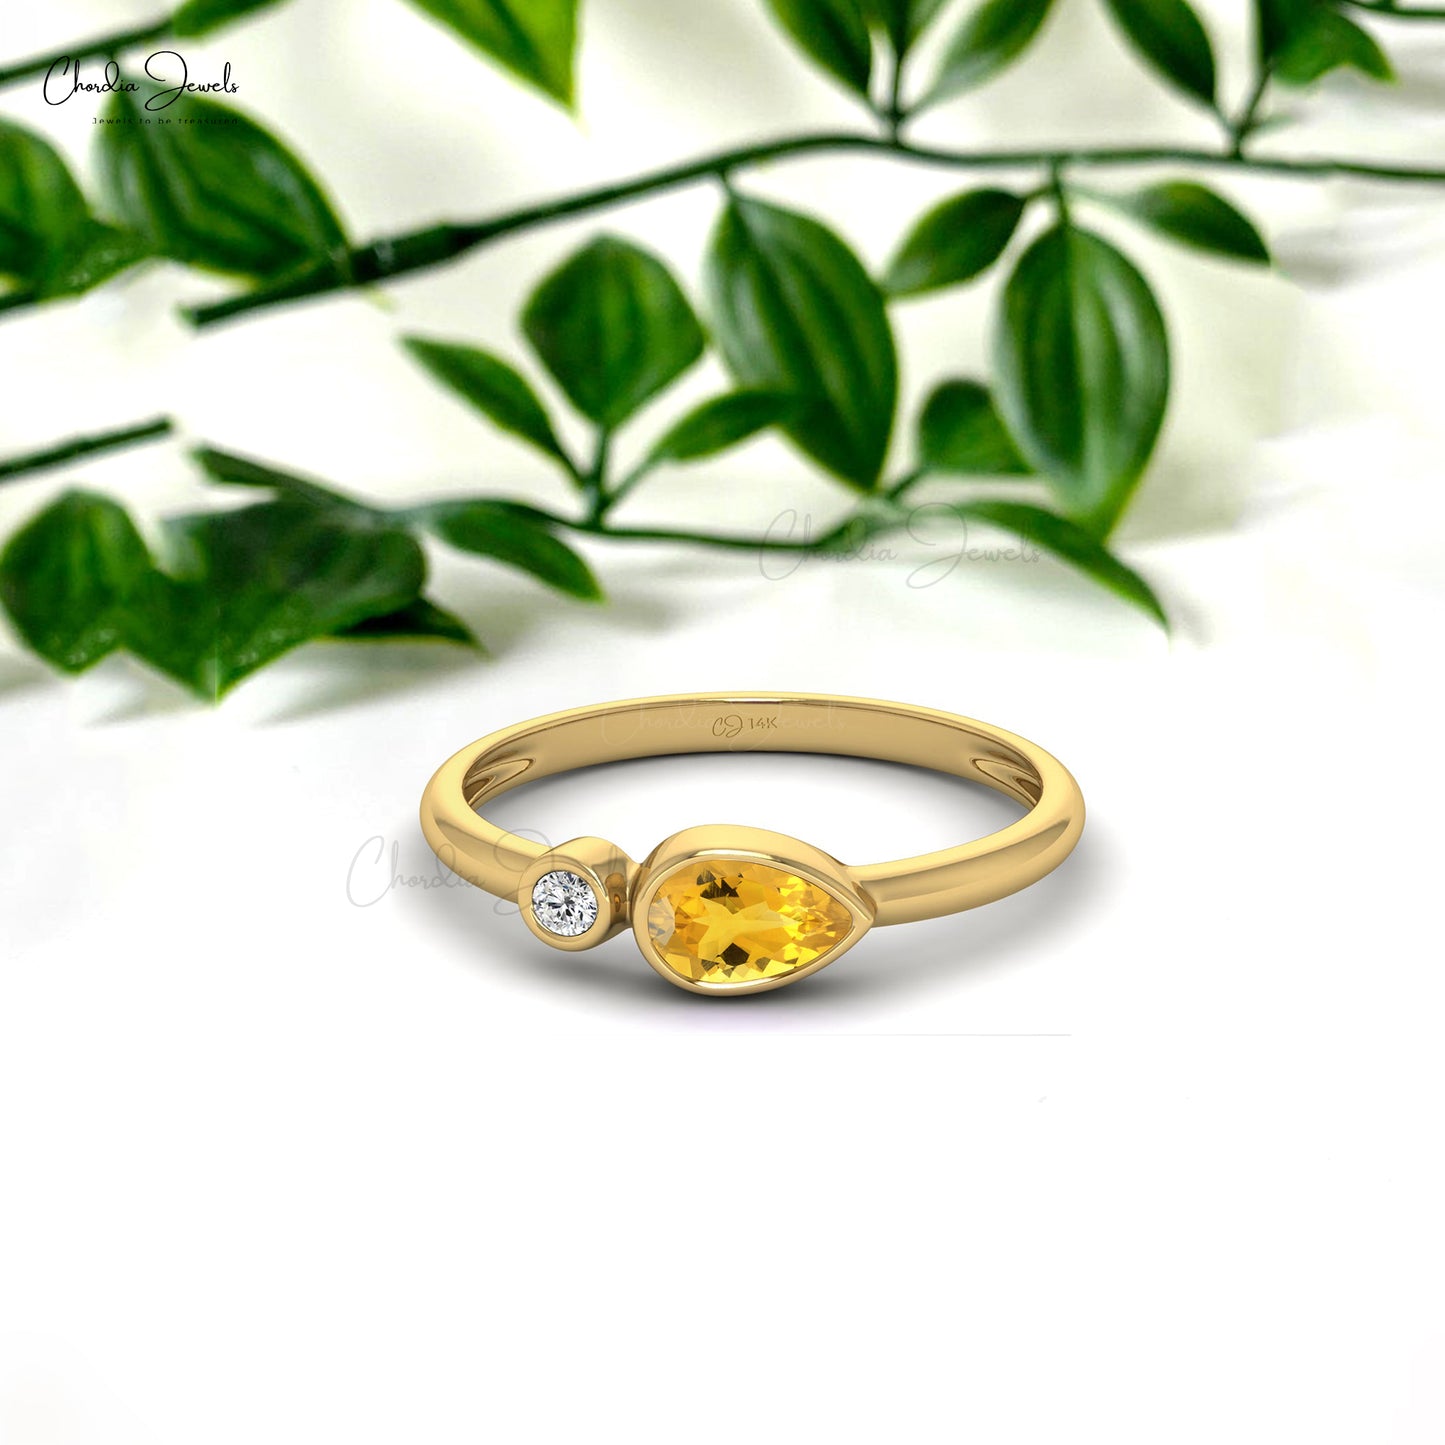 Natural Citrine 6x4mm Pear Cut Gemstone Wedding Ring 14k Real Gold Promise Ring Hallmarked Fine Jewelry For Women's